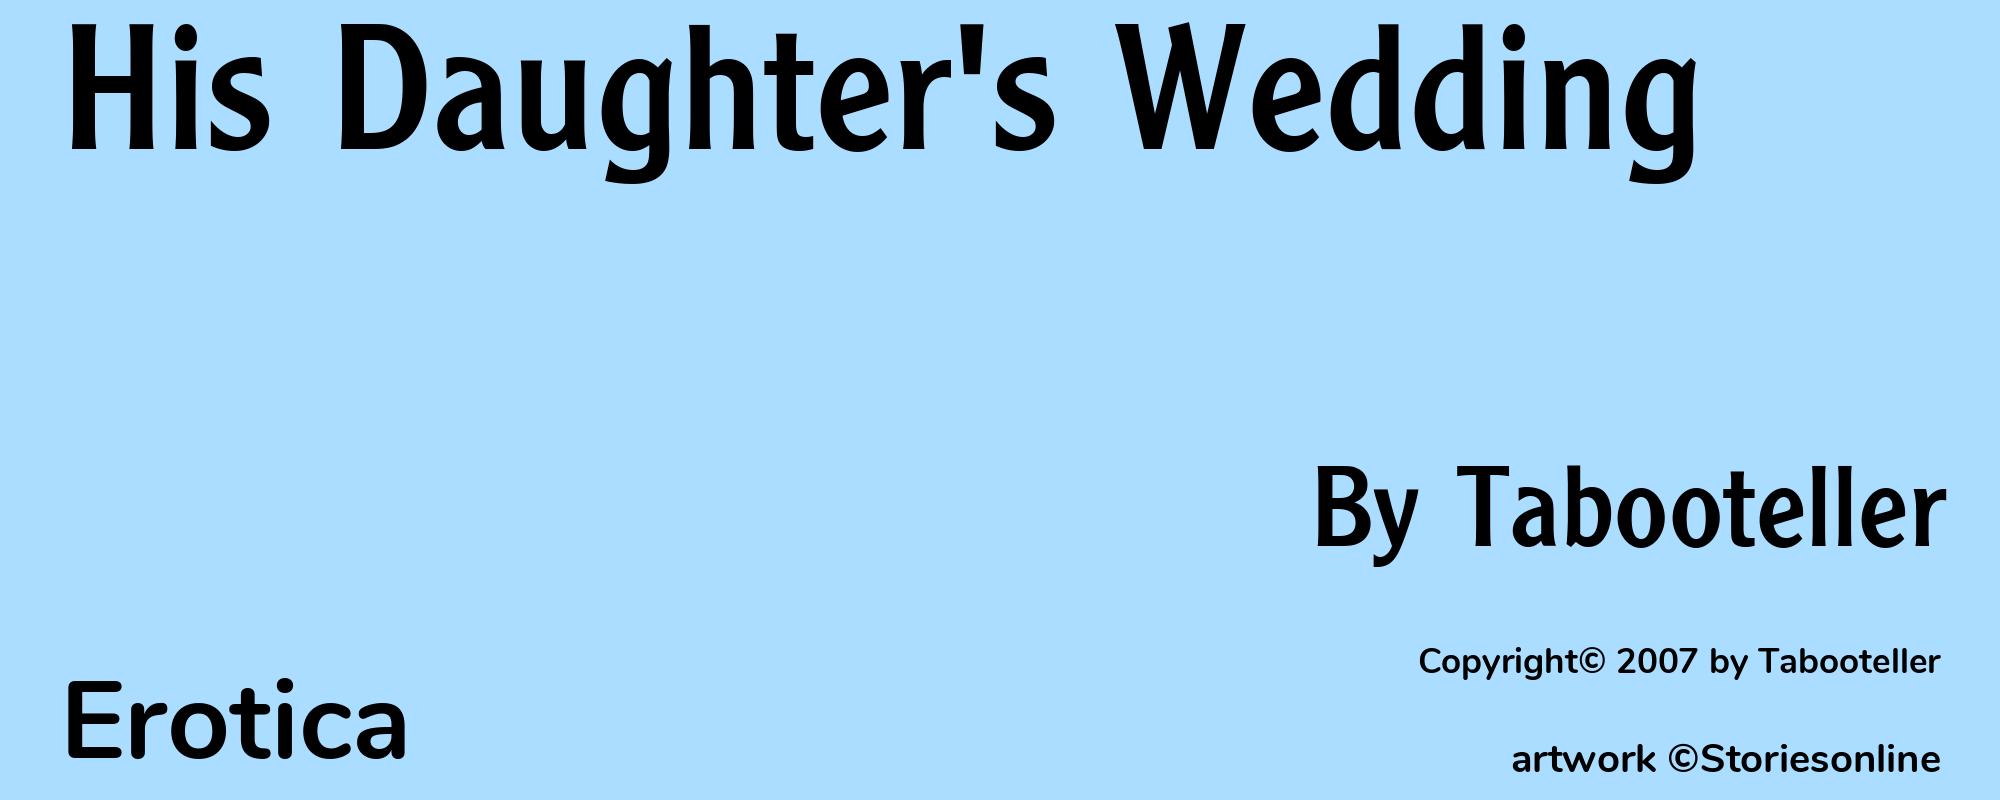 His Daughter's Wedding - Cover